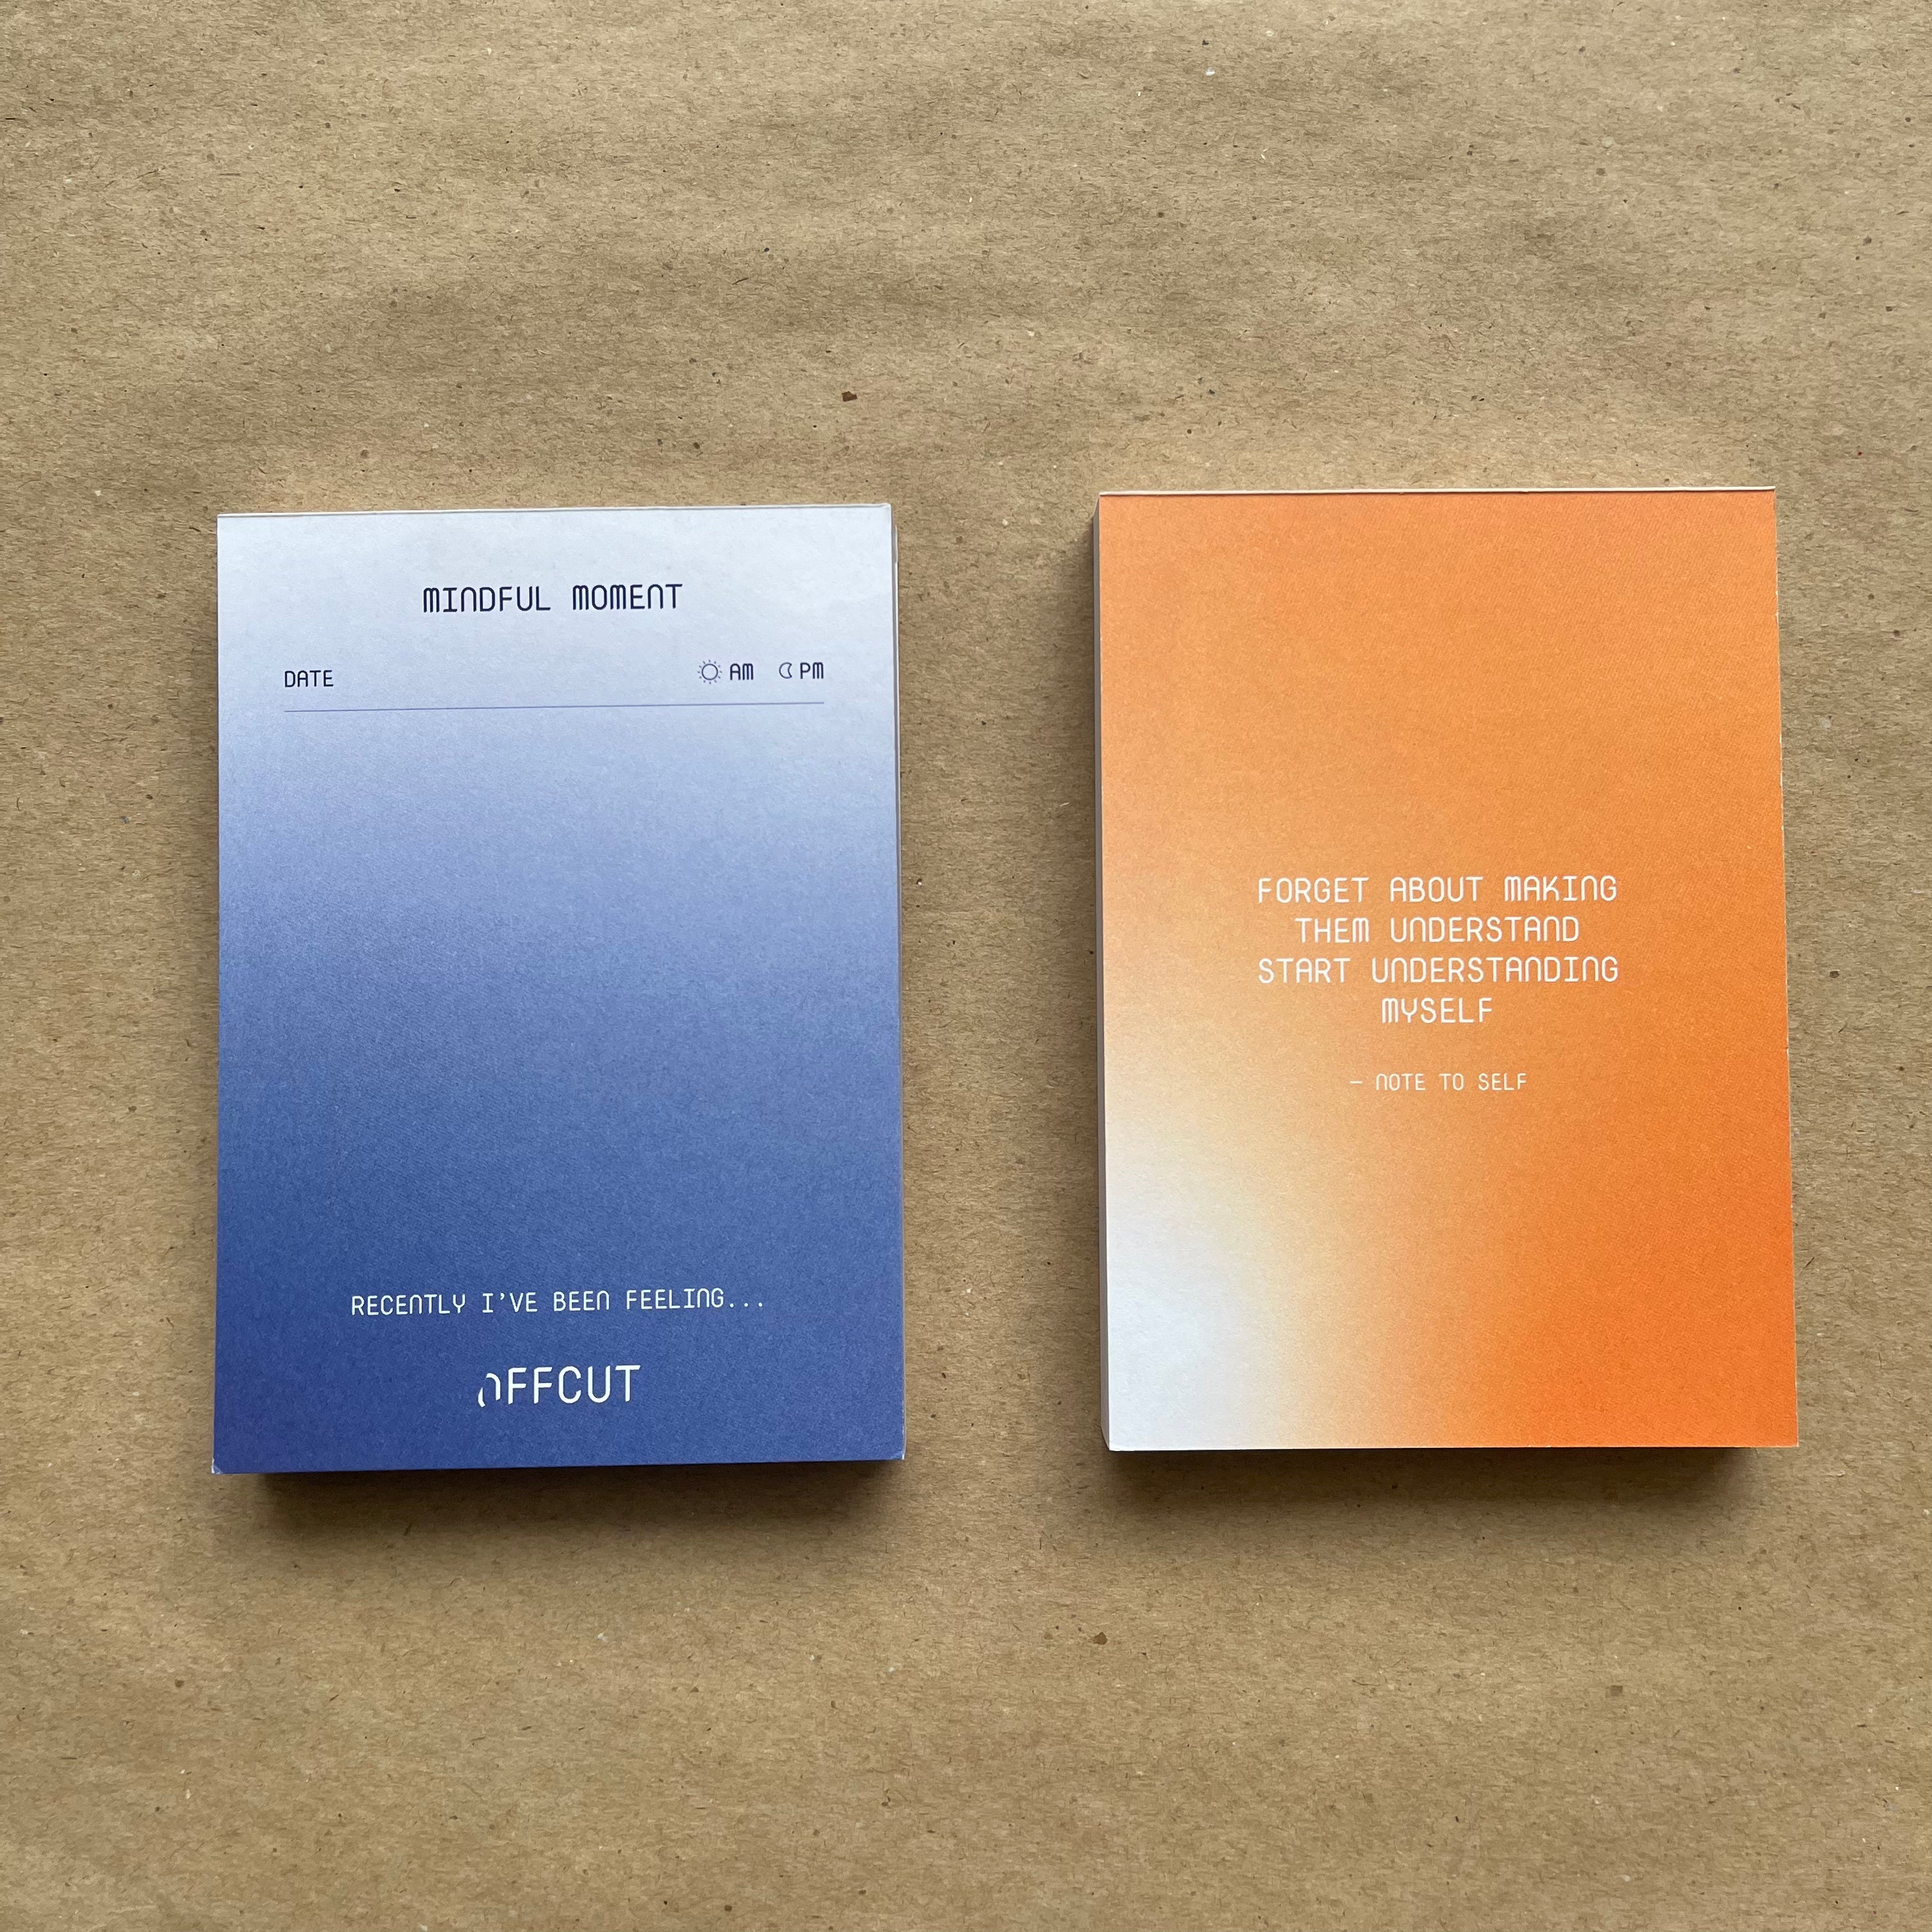 Mindful Moment Notepad (Orange) by OFFCUT